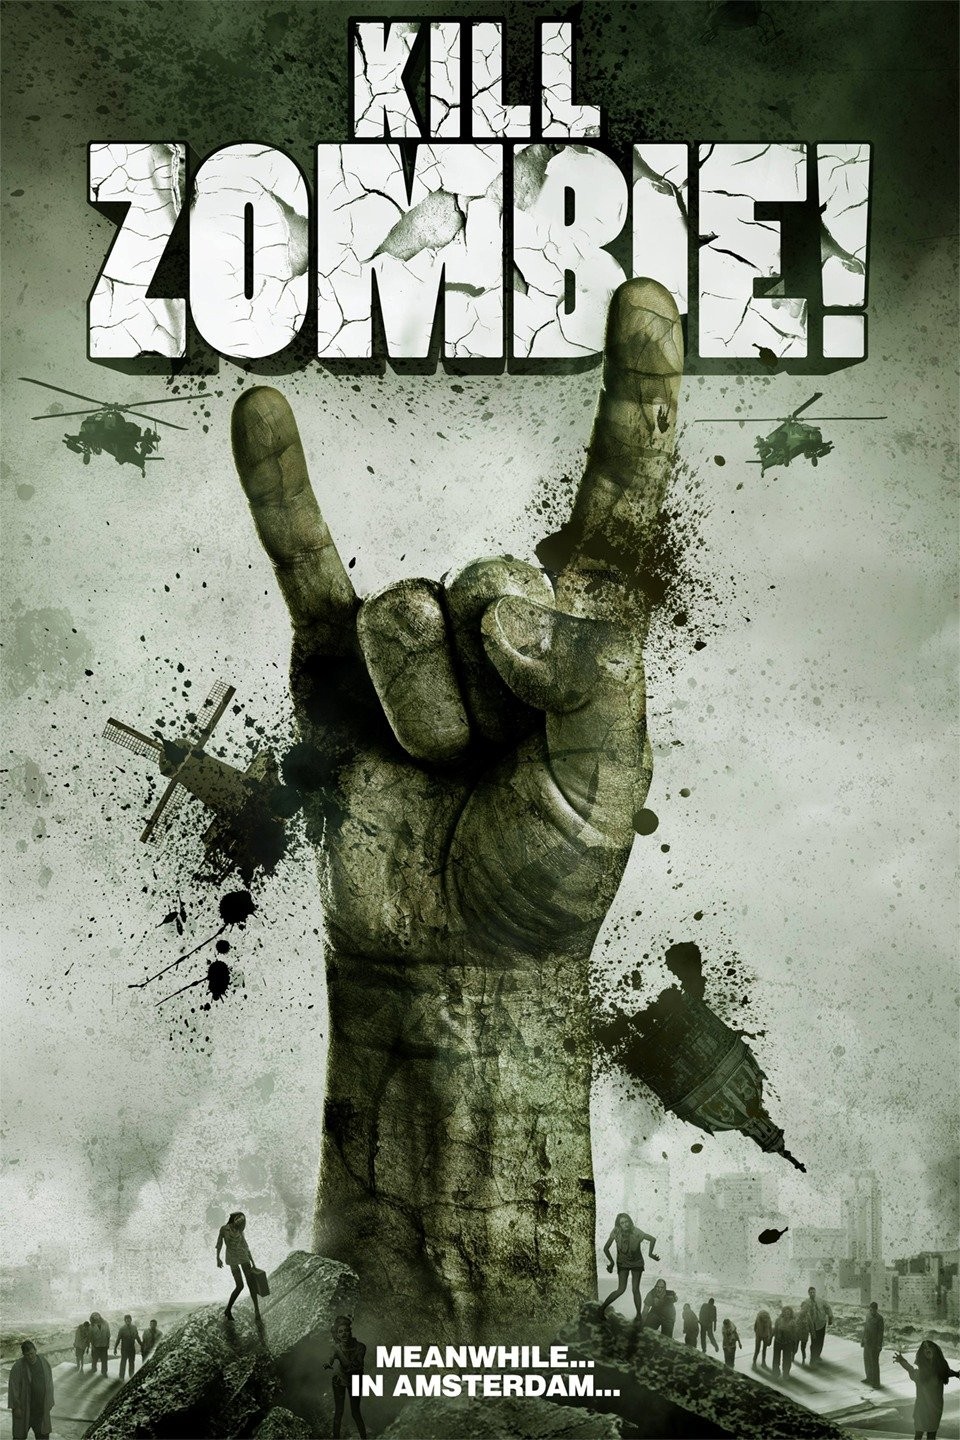 Download Zombie Kill of the Week